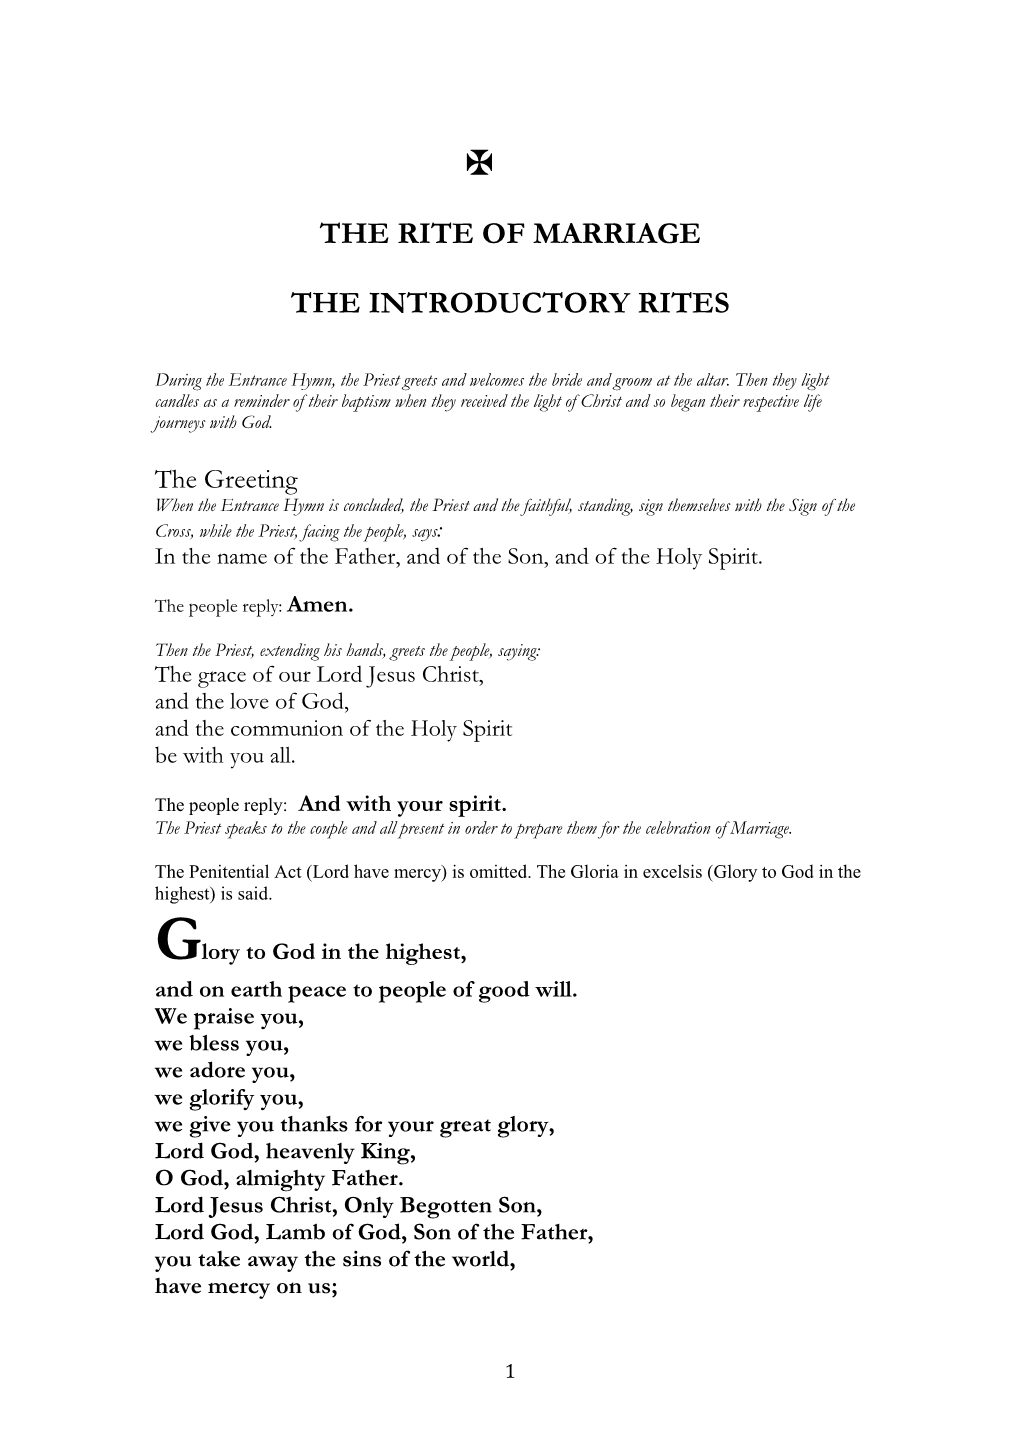 The Rite of Marriage the Introductory Rites